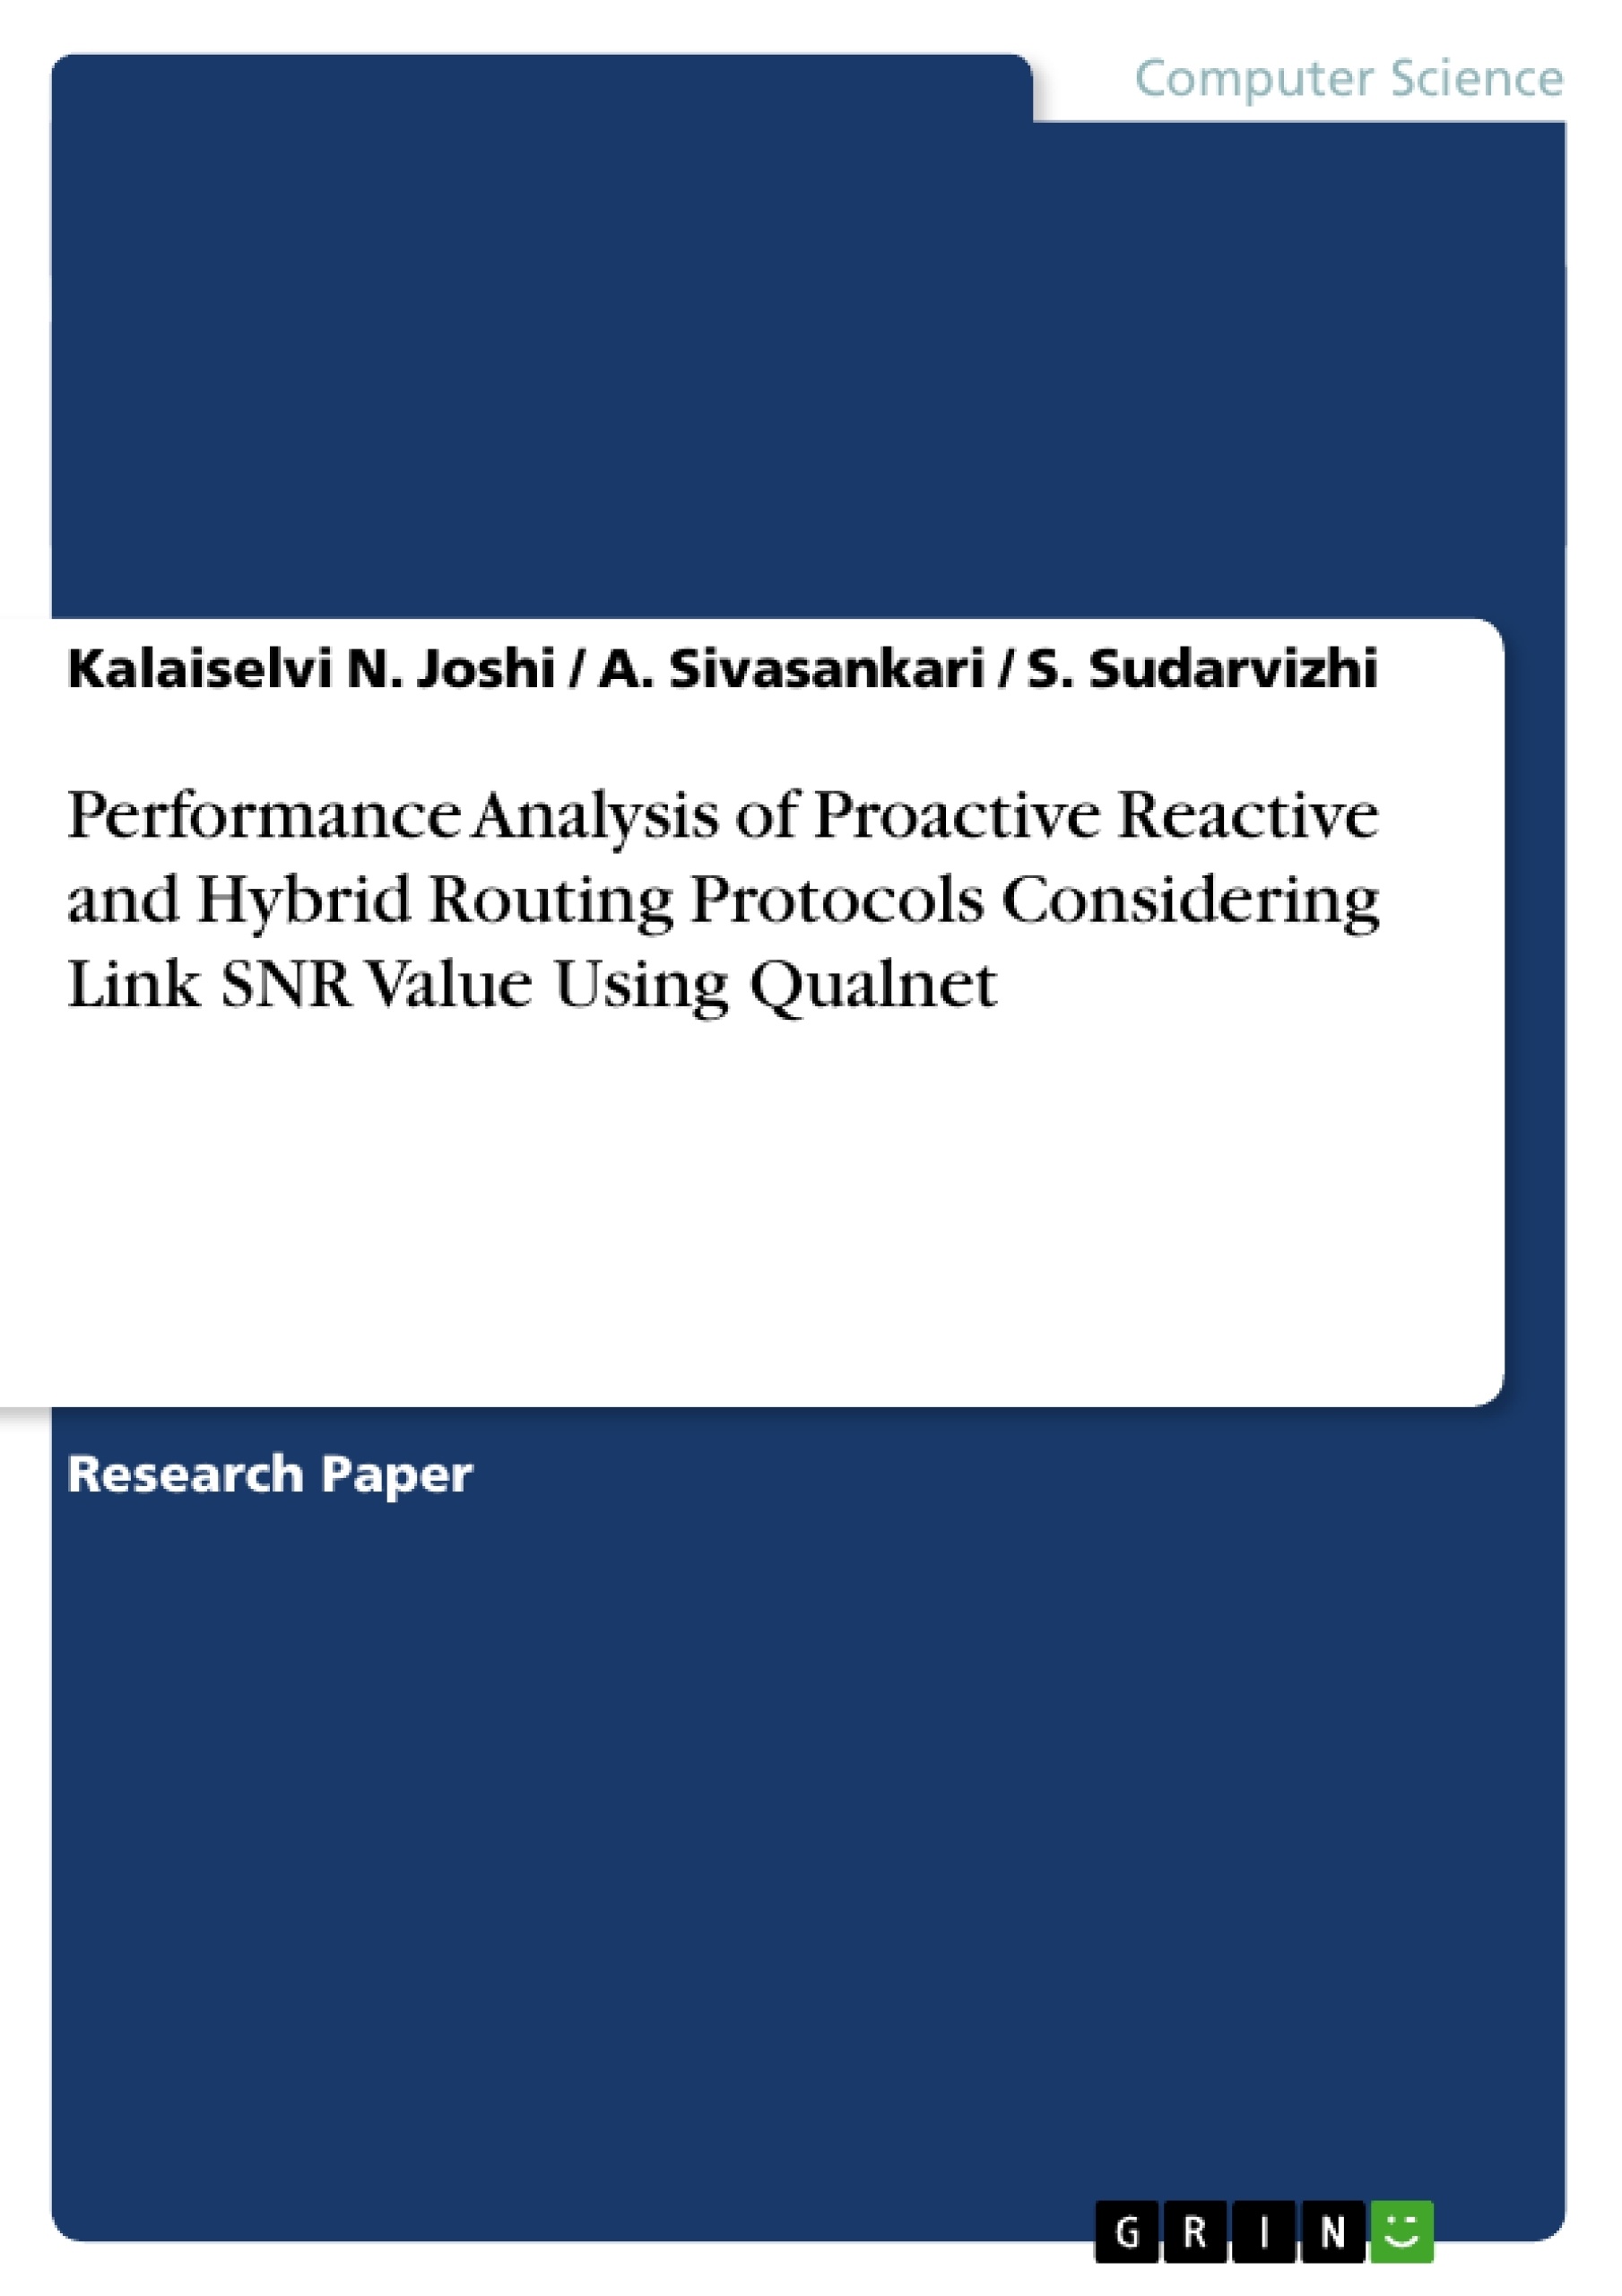 Título: Performance Analysis of Proactive Reactive and Hybrid Routing Protocols Considering Link SNR Value Using Qualnet